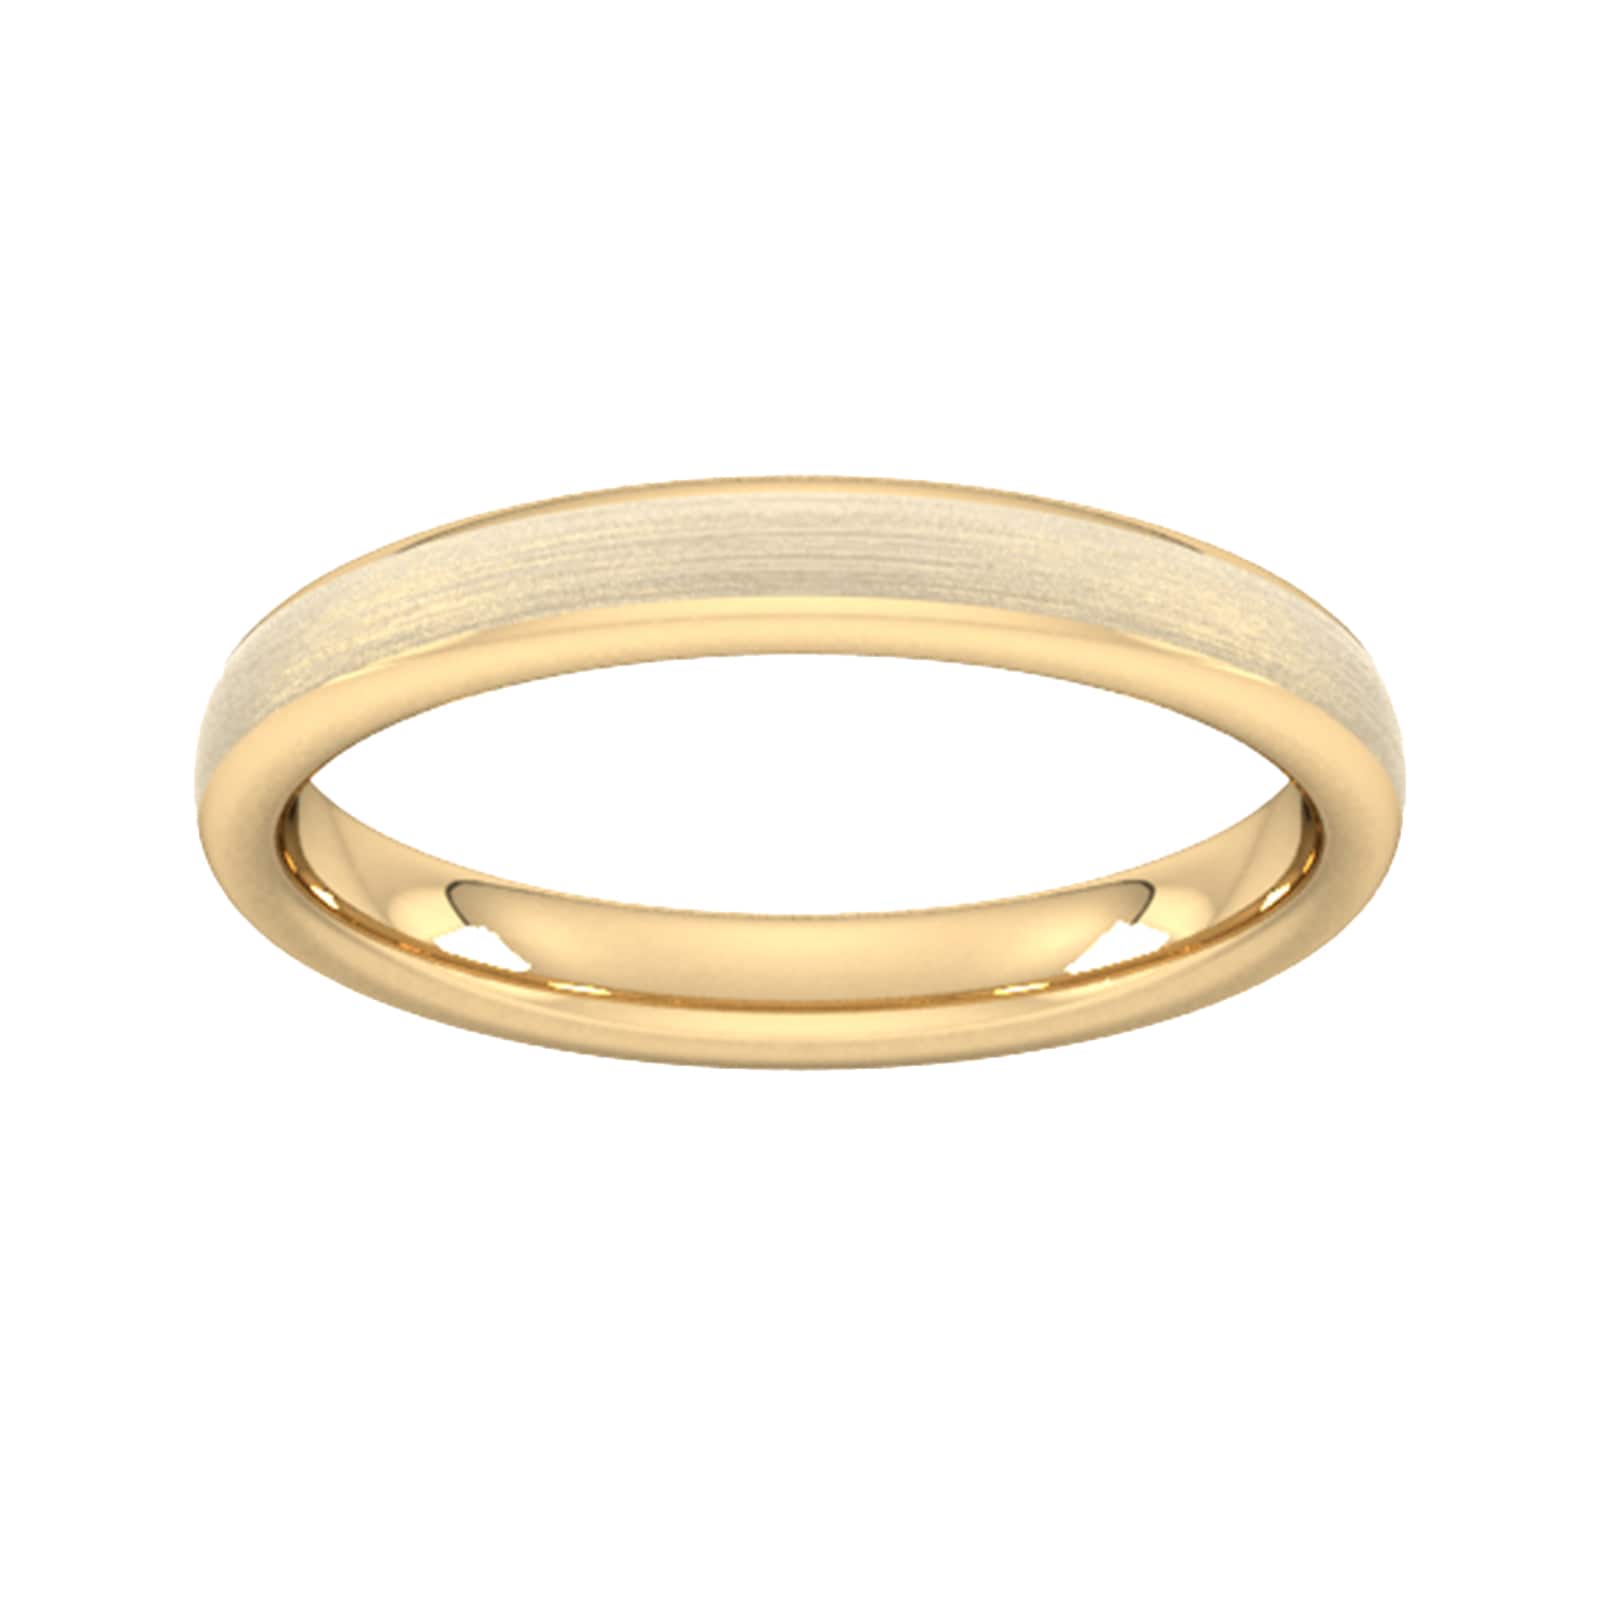 3mm D Shape Heavy Matt Finished Wedding Ring In 18 Carat Yellow Gold - Ring Size Y